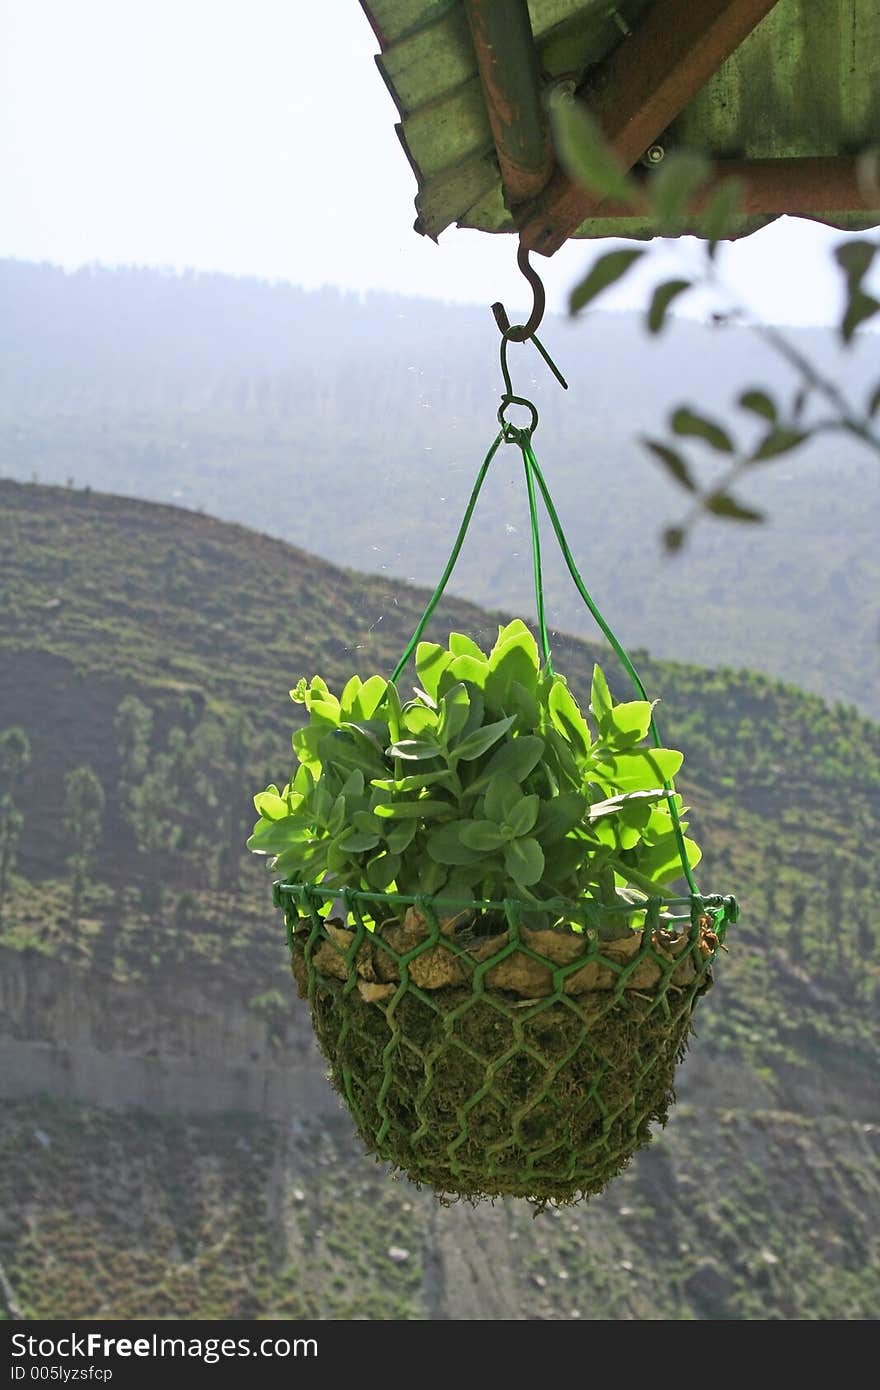 Sunlight Outdoor Hanging plant in hanging outdoor pot with himalayan mountain background , kullu , india. Hanging Garden style. Sunlight Outdoor Hanging plant in hanging outdoor pot with himalayan mountain background , kullu , india. Hanging Garden style